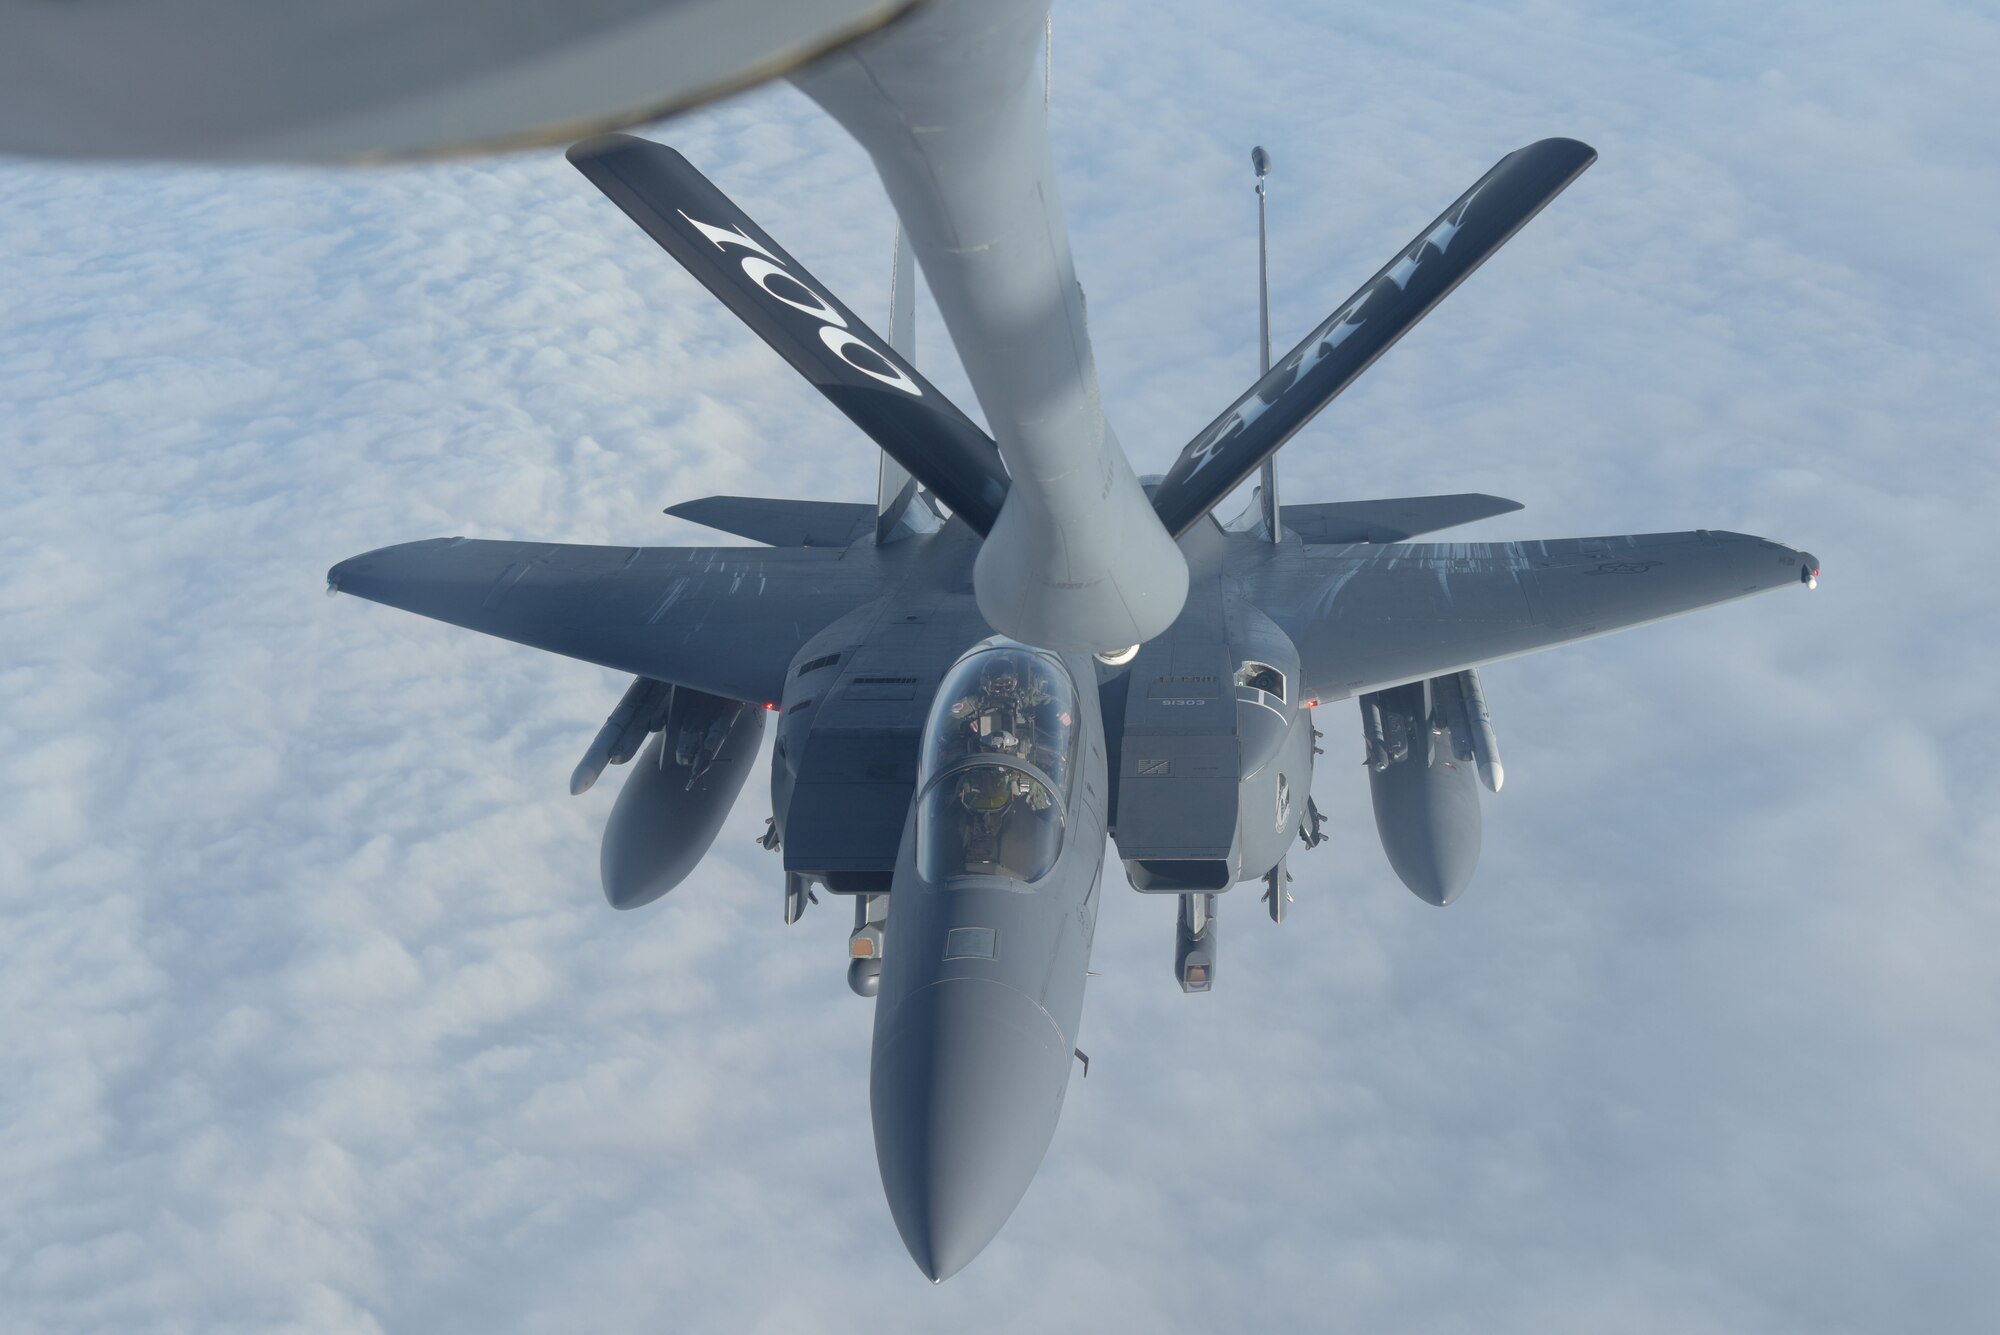 A U.S. Air Force F-15E Strike Eagle assigned to the 492nd Fighter Squadron, RAF Lakenheath, England, moves into position to receive fuel from a 100th Air Refueling Wing KC-135 Stratotanker during the Allied Combat Lethality Exercise over Poland, Dec. 10, 2019. Exercises like these are opportunities to provide Airmen the opportunity to fly and train alongside NATO allies and partners. (U.S. Air Force photo by Senior Airman Benjamin Cooper)